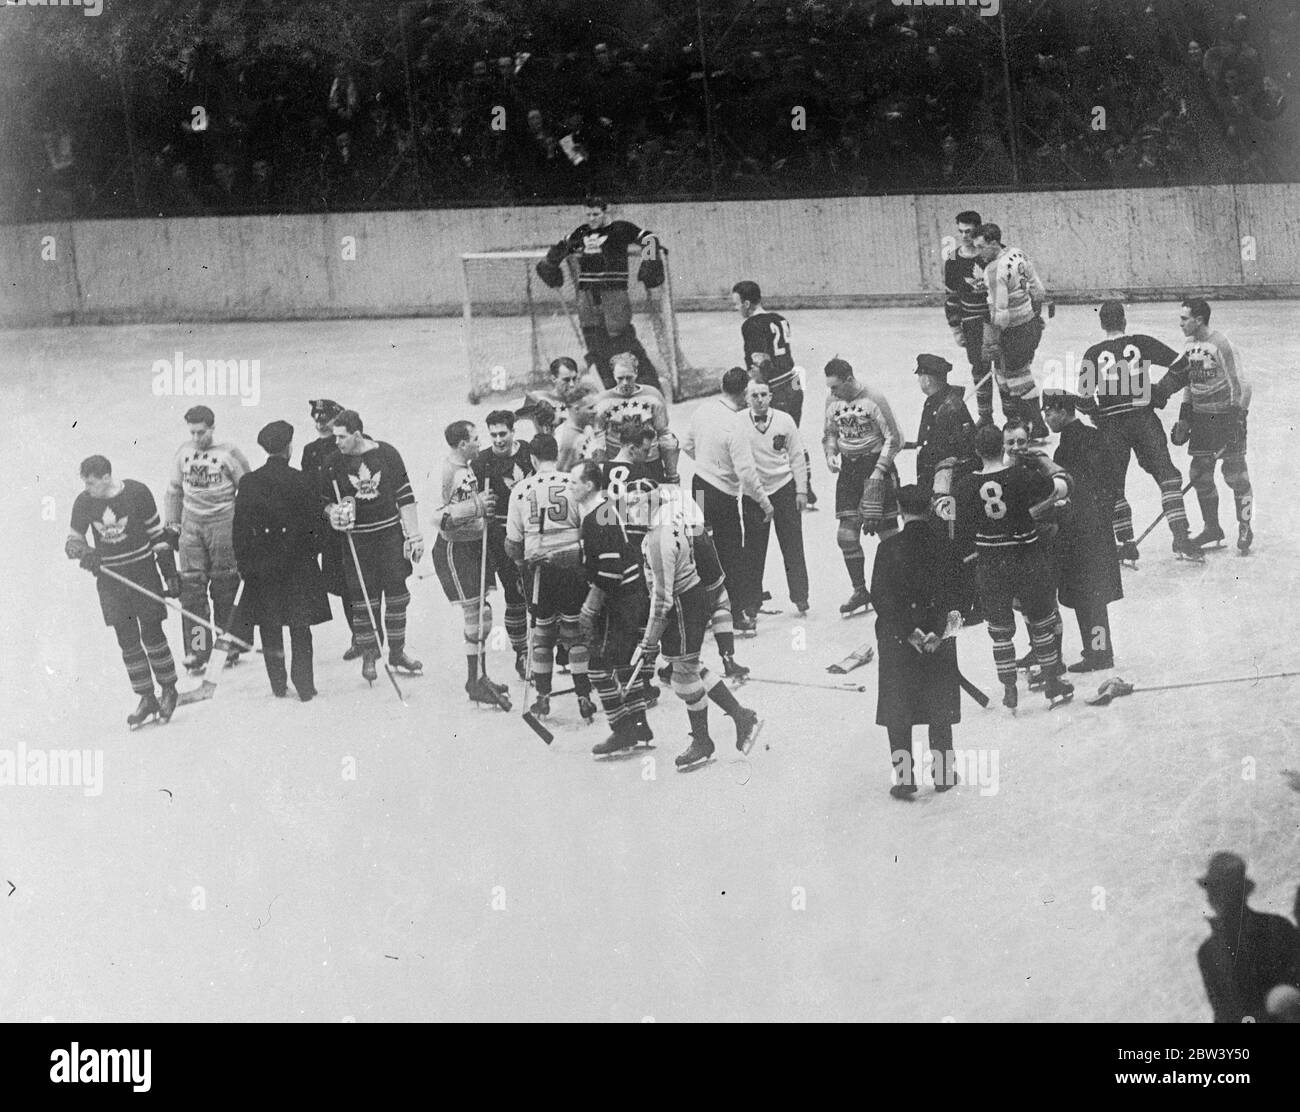 New York Ice hockey match ends in free fight , Police intervene . A free fight , in which a squad of police were forced to intervene to restore order , marked the ice hockey match between the New York Americas , and Toronto Maple Leafs at the Madison Square Gardens , new York . The Americans defeated the Maple Leafs 3 - 1 . Photo shows , police restoring order among the players on the ice at Madison Square Gardens . 9 March 1937 Stock Photo